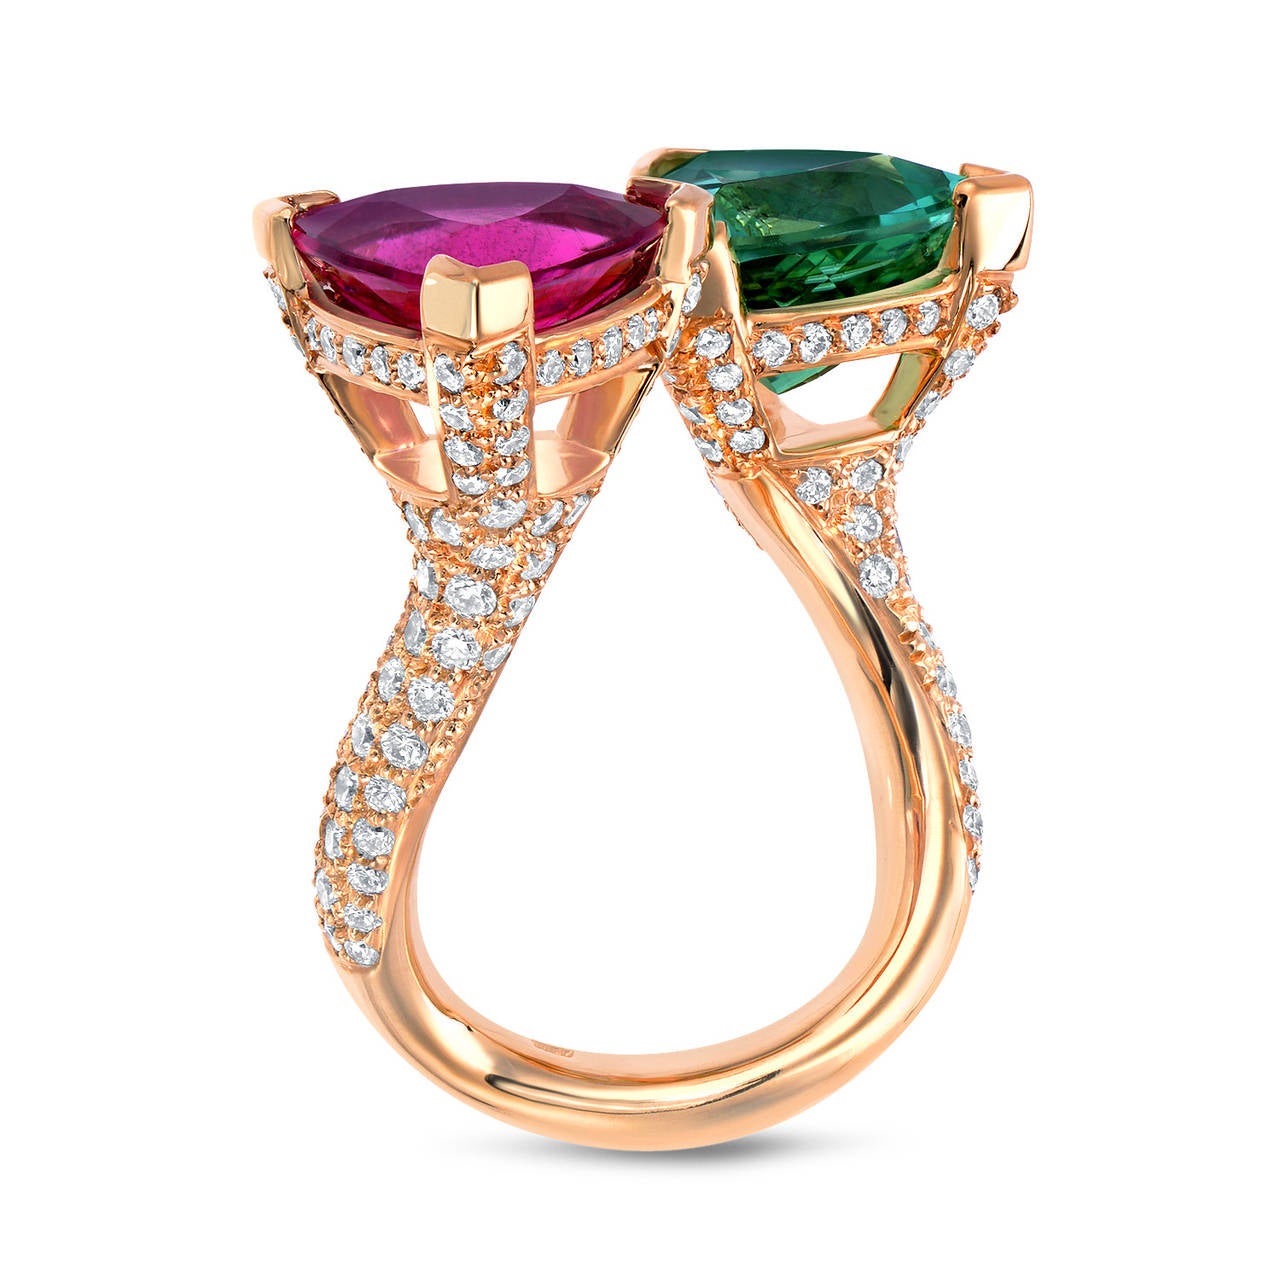 Marvelous 3.32 carat trillion Mint Green Tourmaline and 2.82 carat trillion Pink Tourmaline are showcased together in this conversational 1.11 carat diamond 18K yellow gold ring. 
Size 6.5. Resizing is complimentary upon request.
Returns are